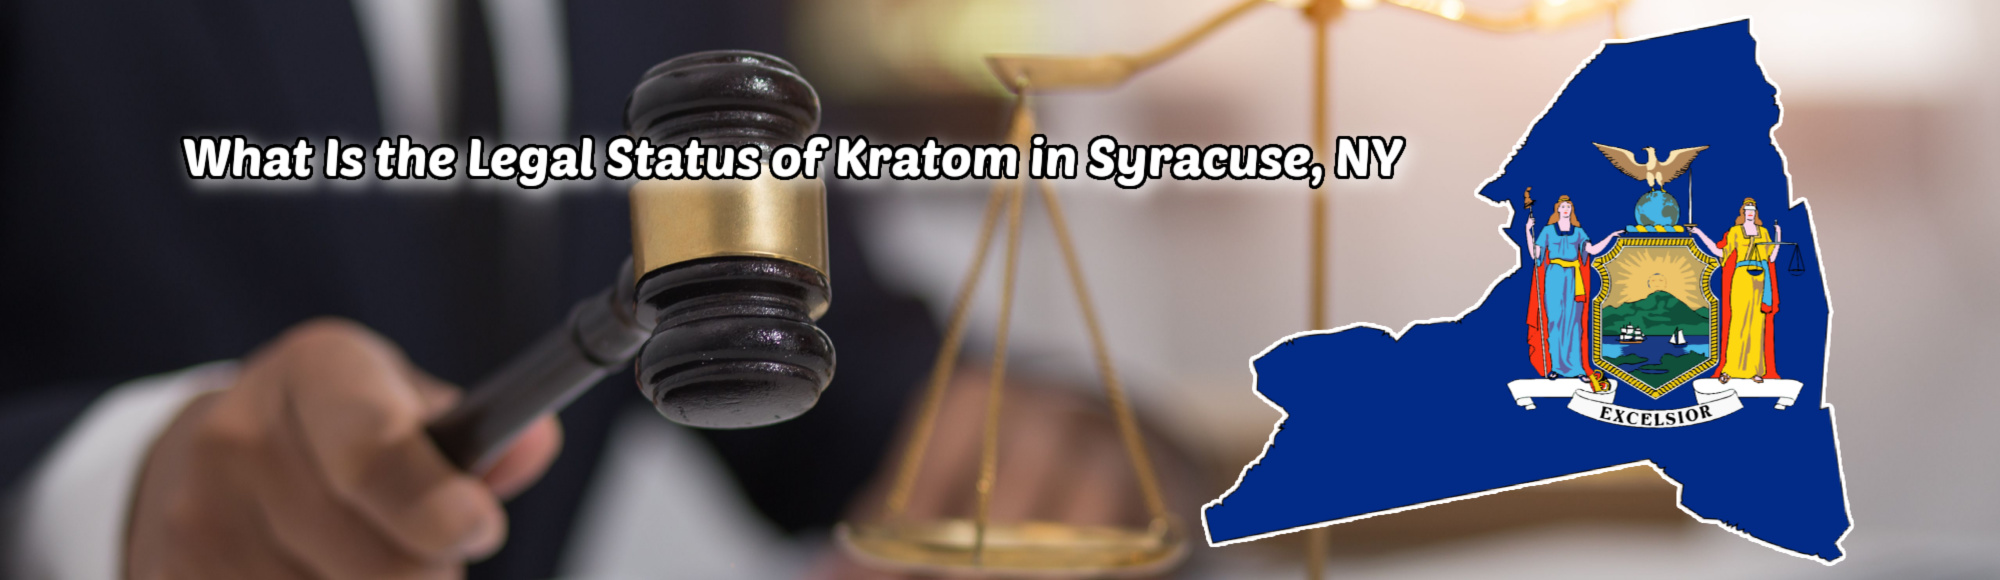 image of what is the legal status of kratom in syracuse ny